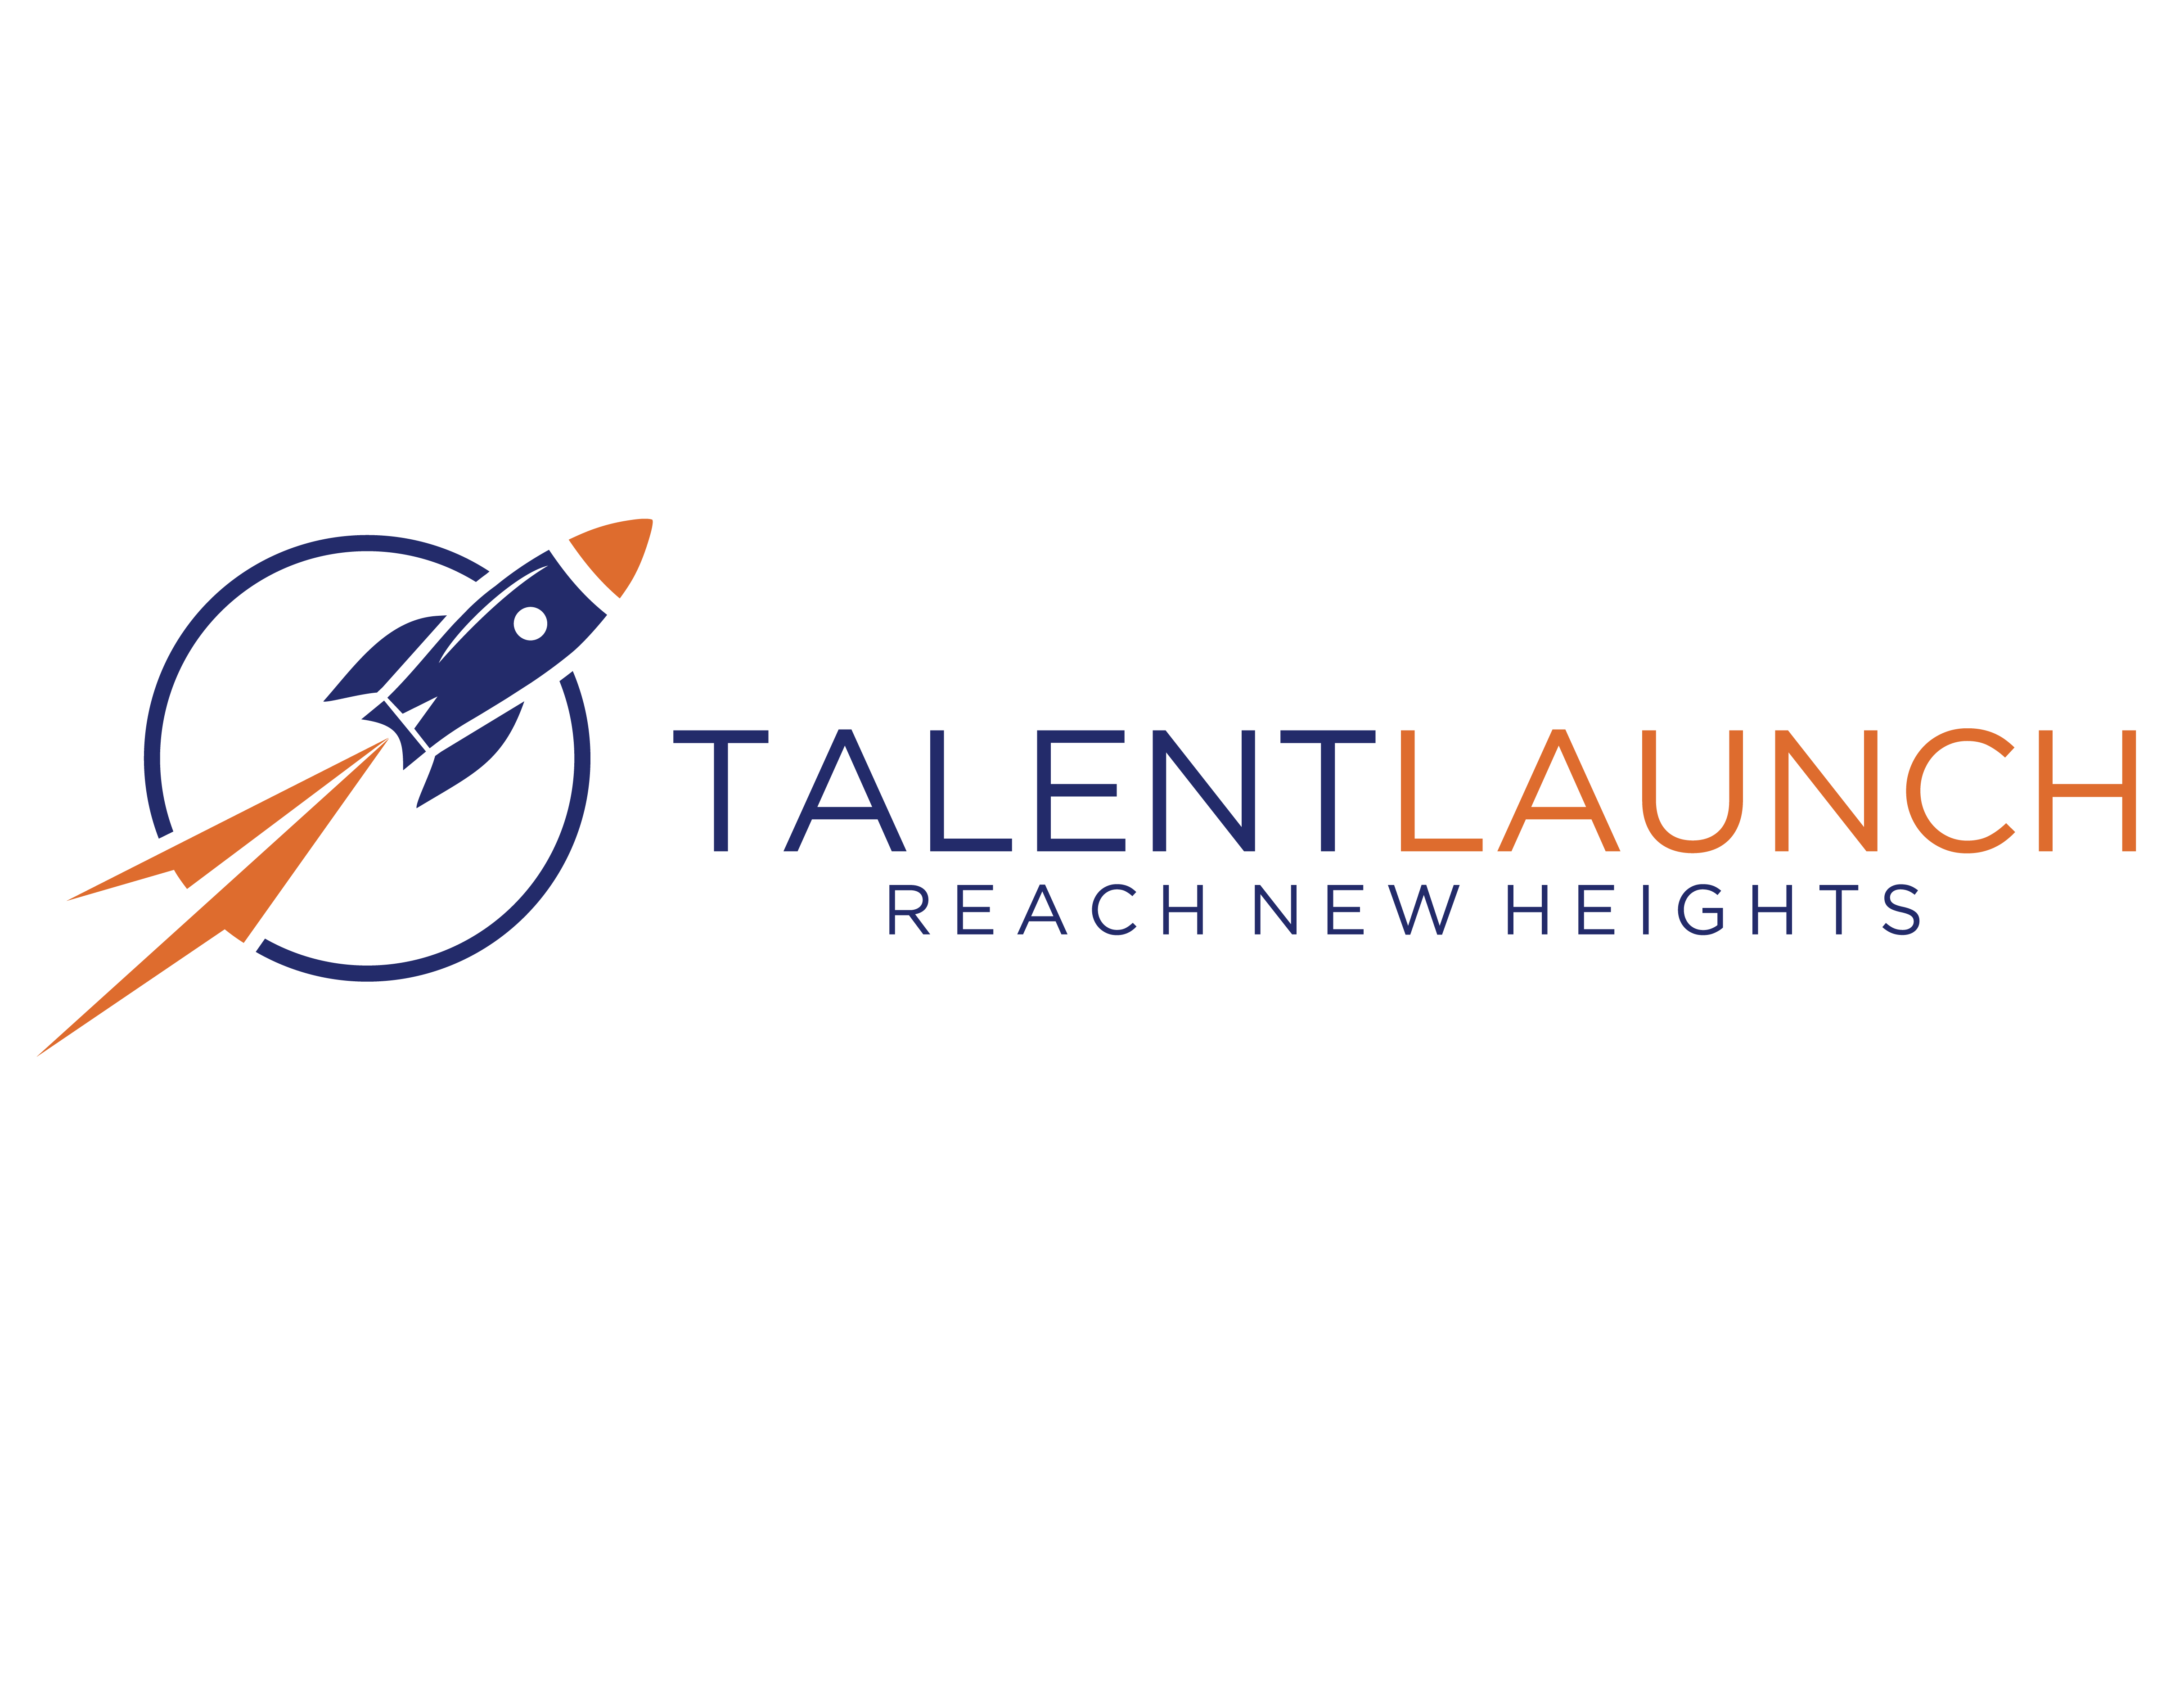 TalentLaunch is an accelerator company created to fuel the staffing and recruitment industry to reach new heights through technology, marketi